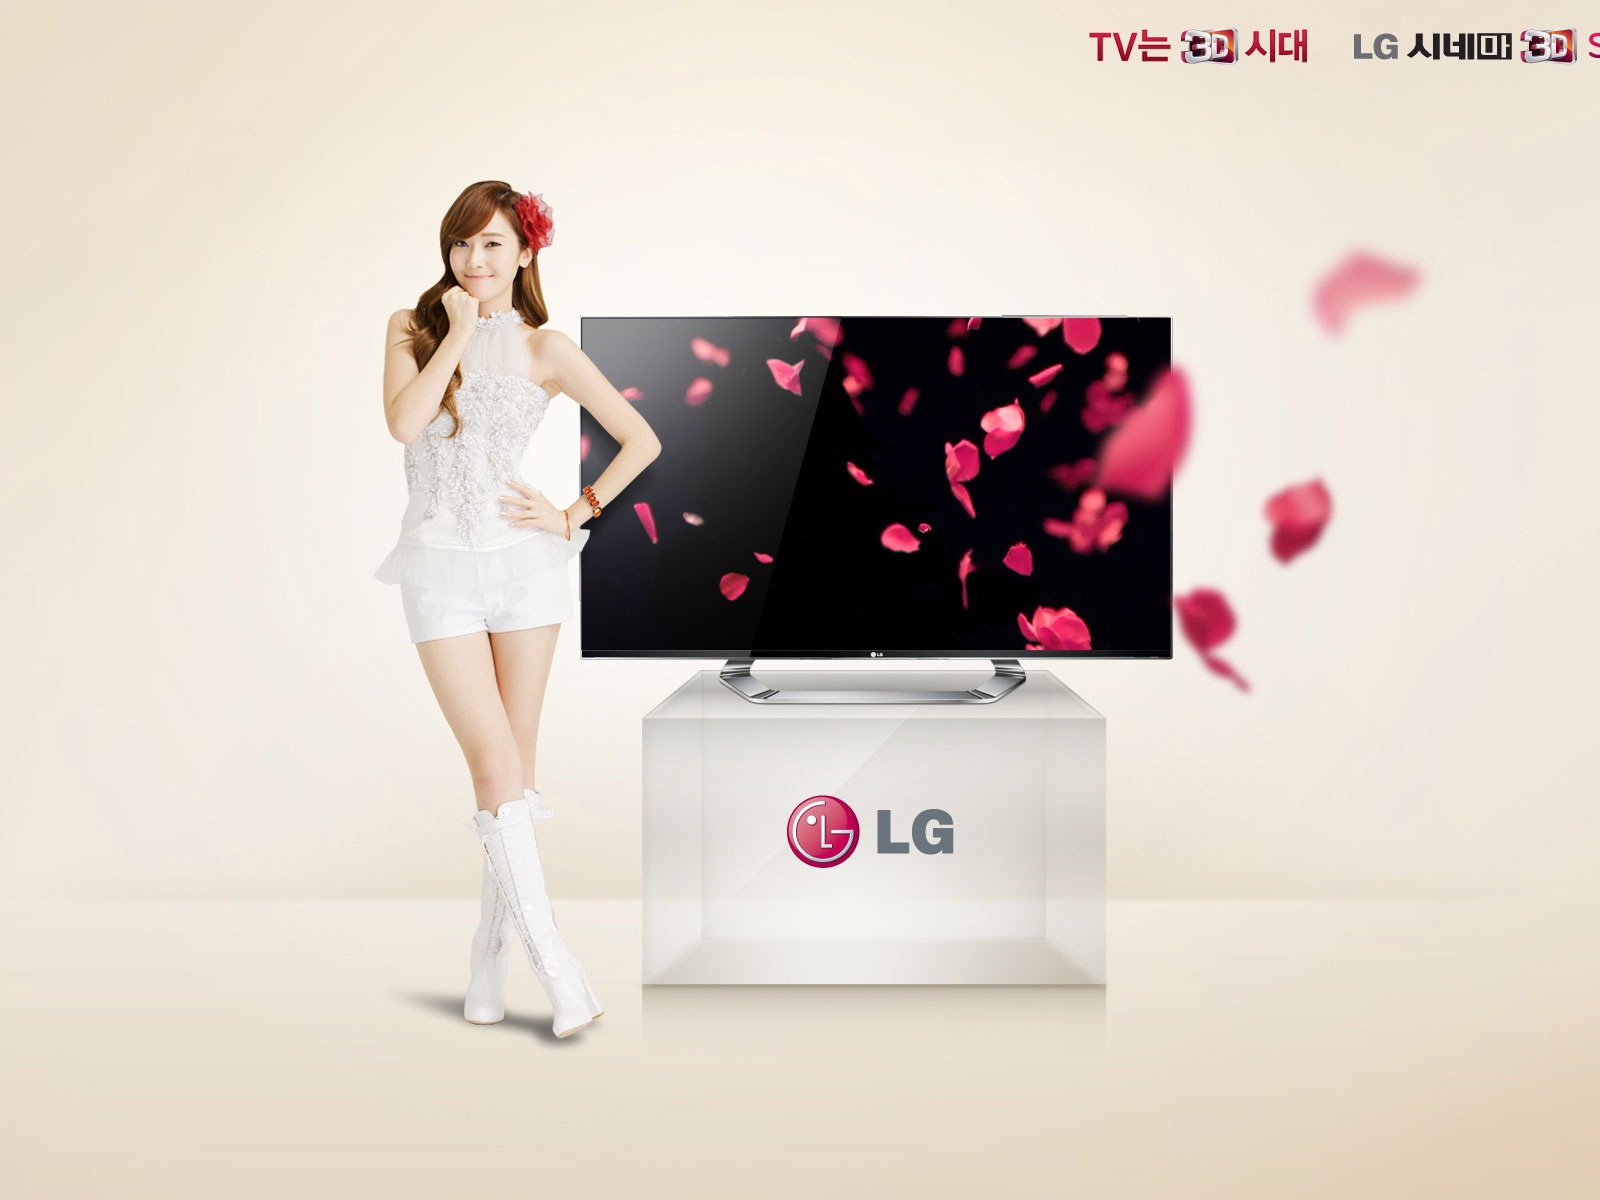 Girls Generation ACE and LG endorsements ads HD wallpapers #18 - 1600x1200